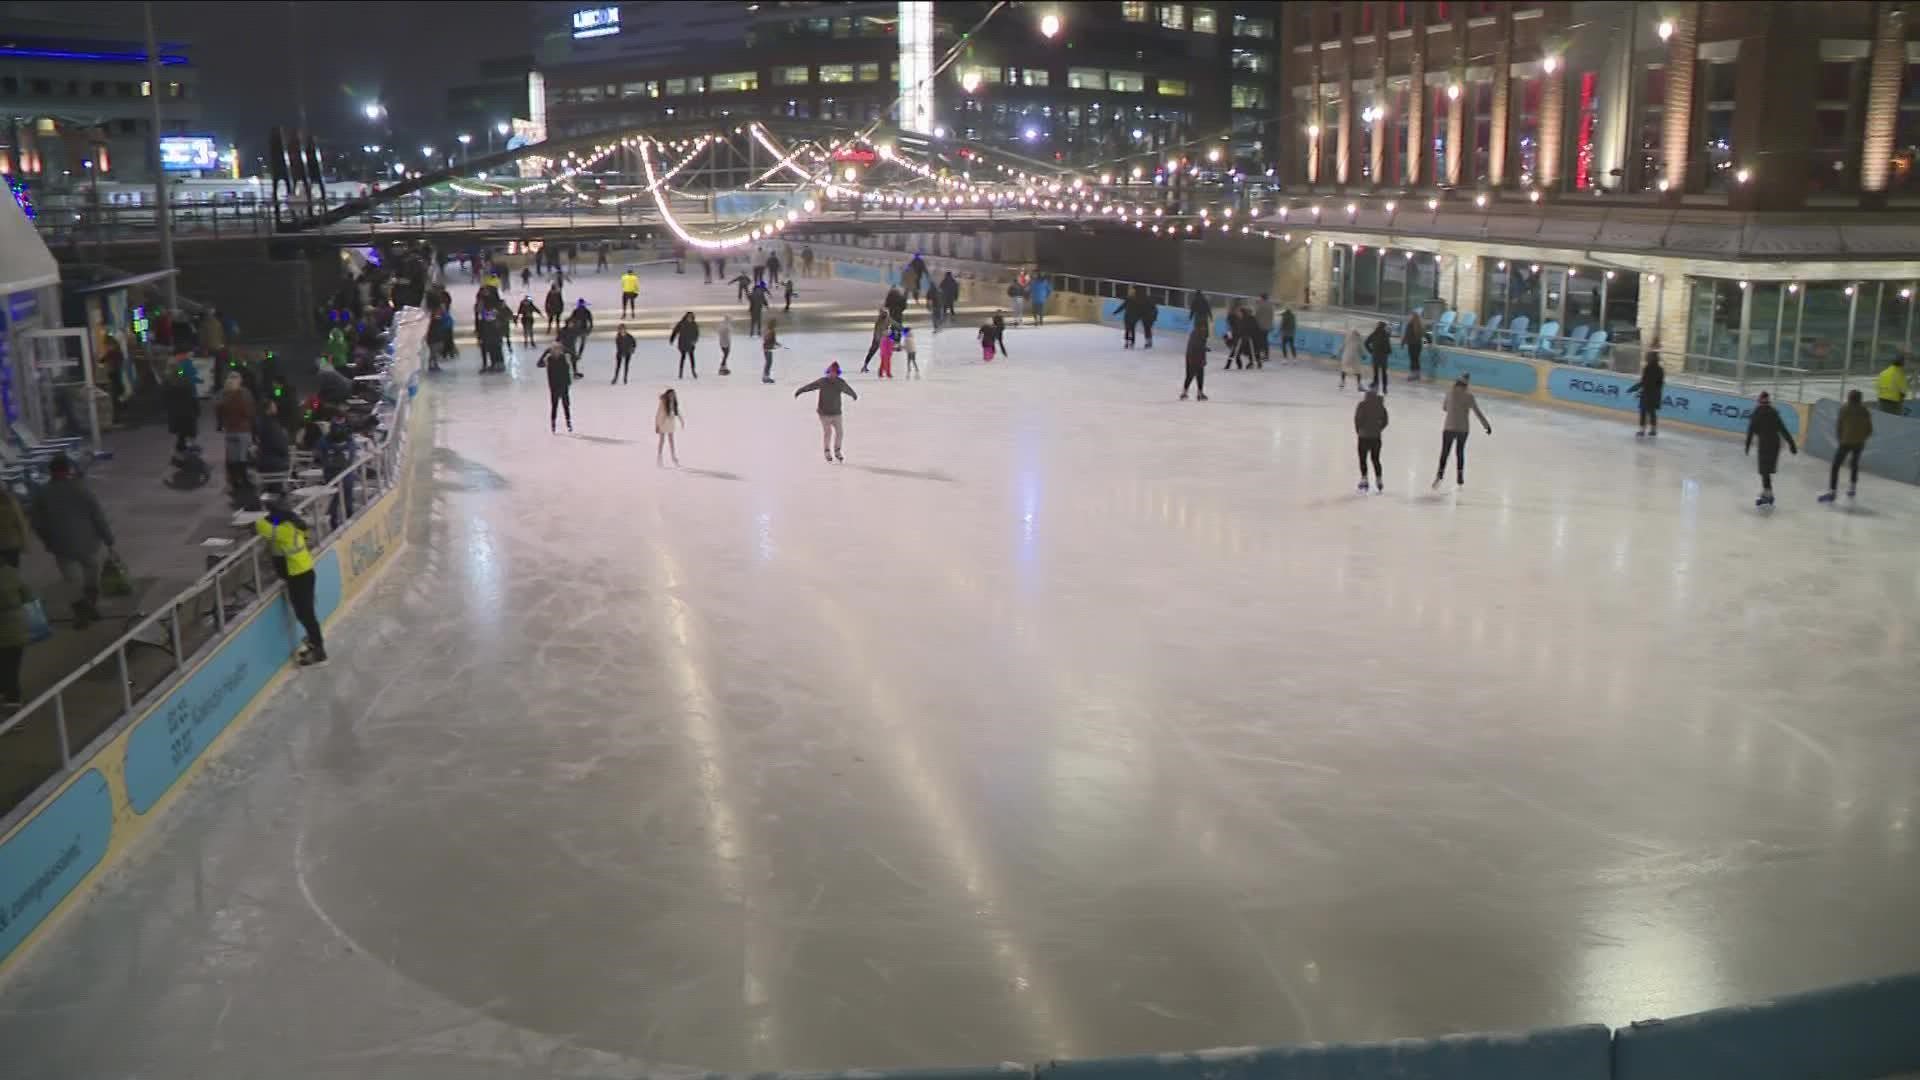 Special attractions will take over the ice from Friday through Monday.